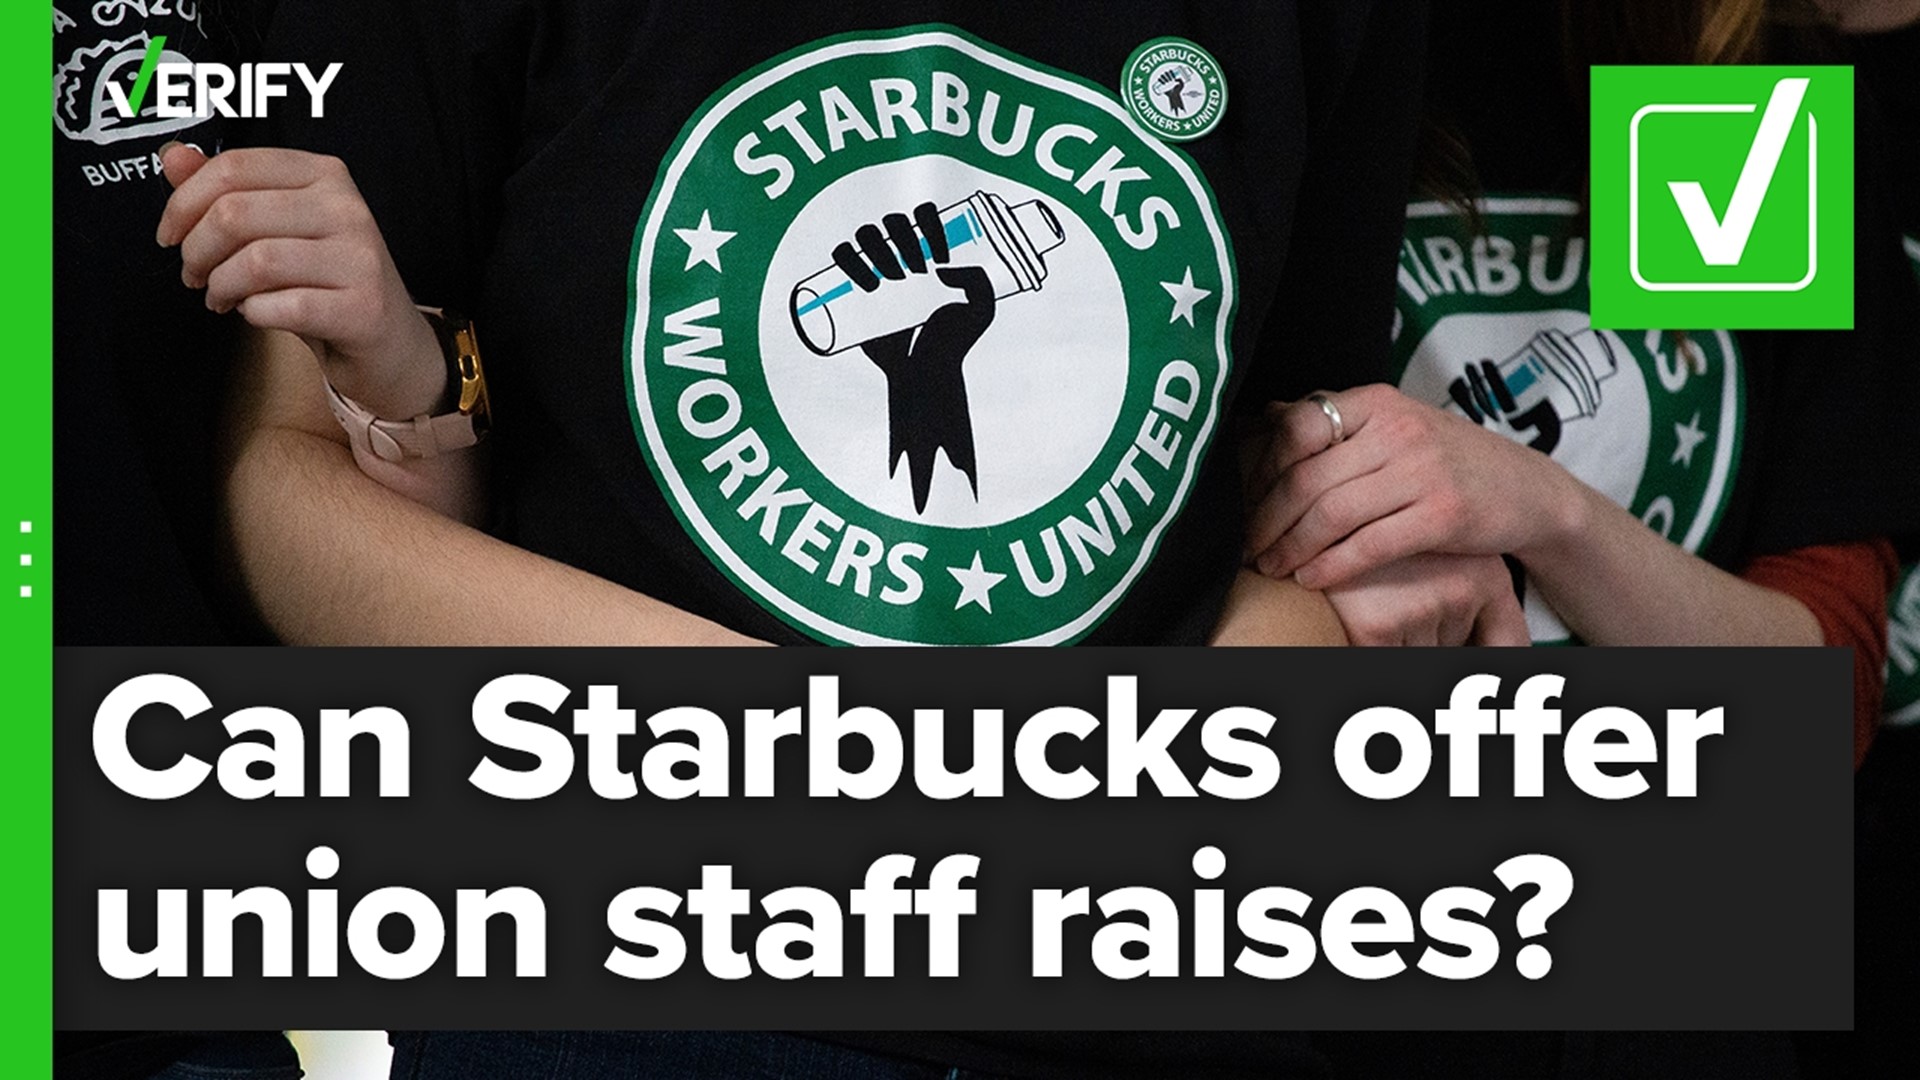 Labor law doesn’t stop Starbucks from offering new benefits to union employees. It does prevent the company from implementing new benefits without union approval.